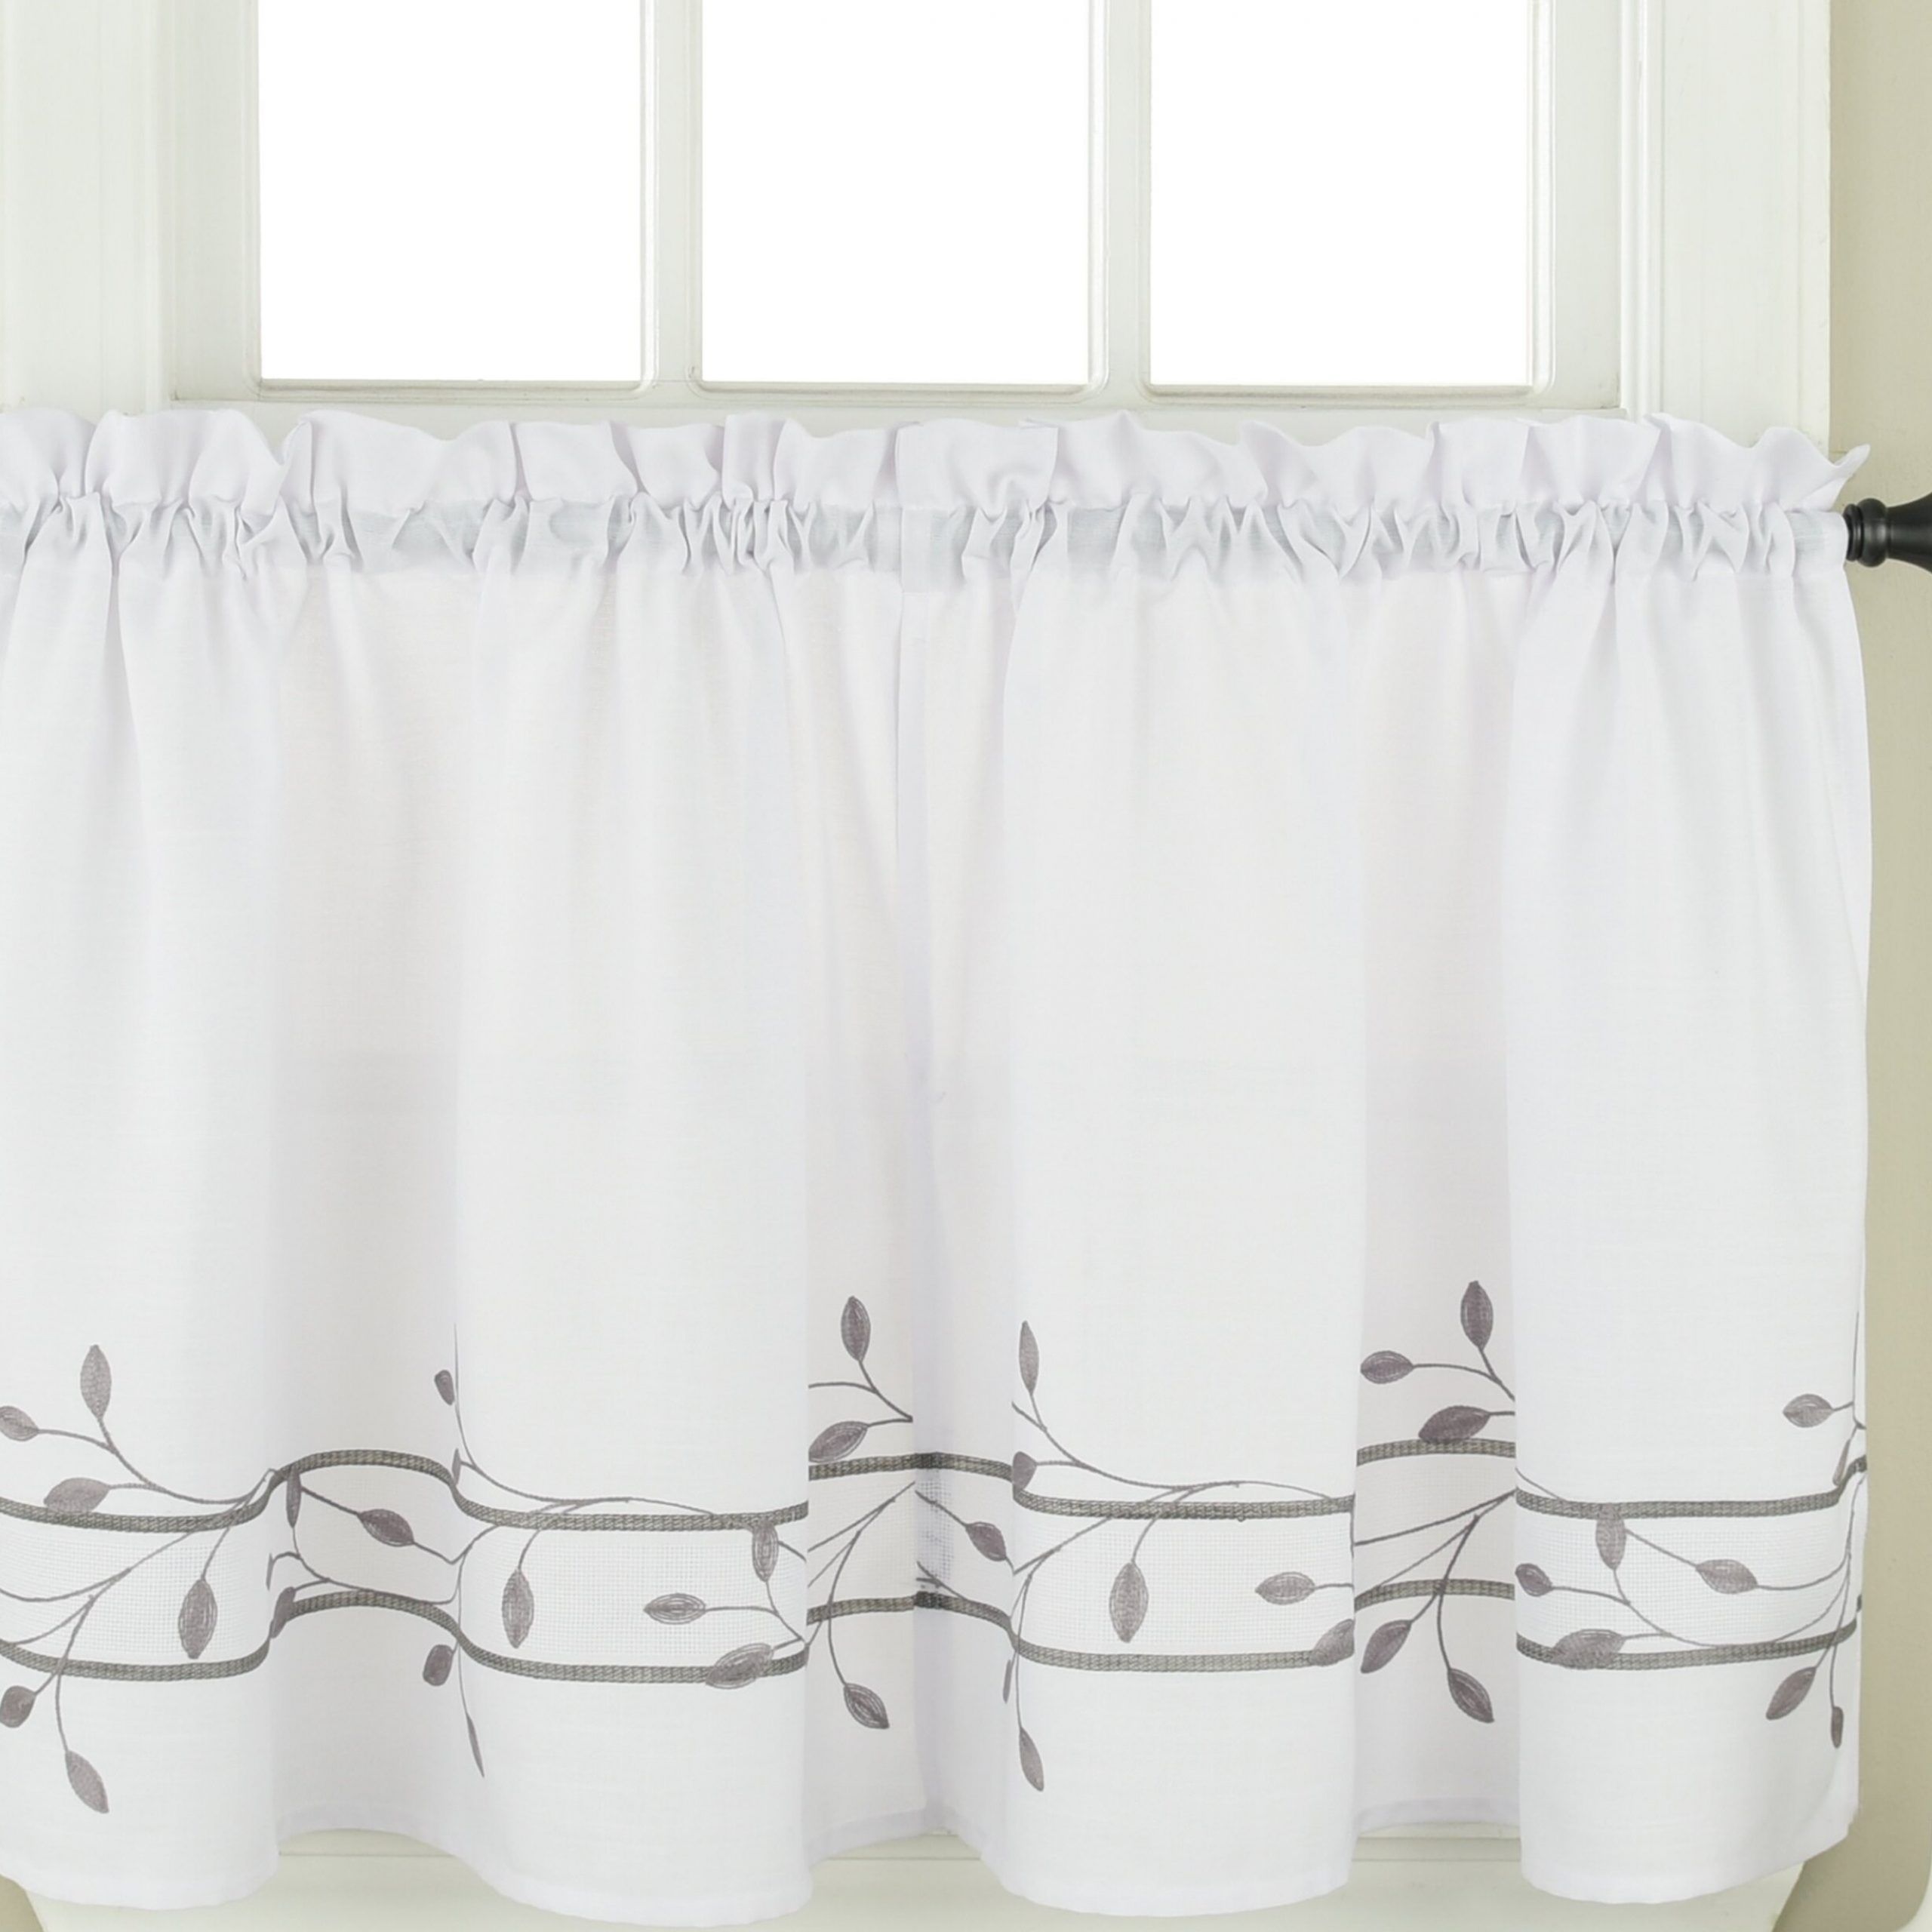 Bouck Embroidered Tier Cafe Curtain Throughout Serene Rod Pocket Kitchen Tier Sets (View 12 of 20)